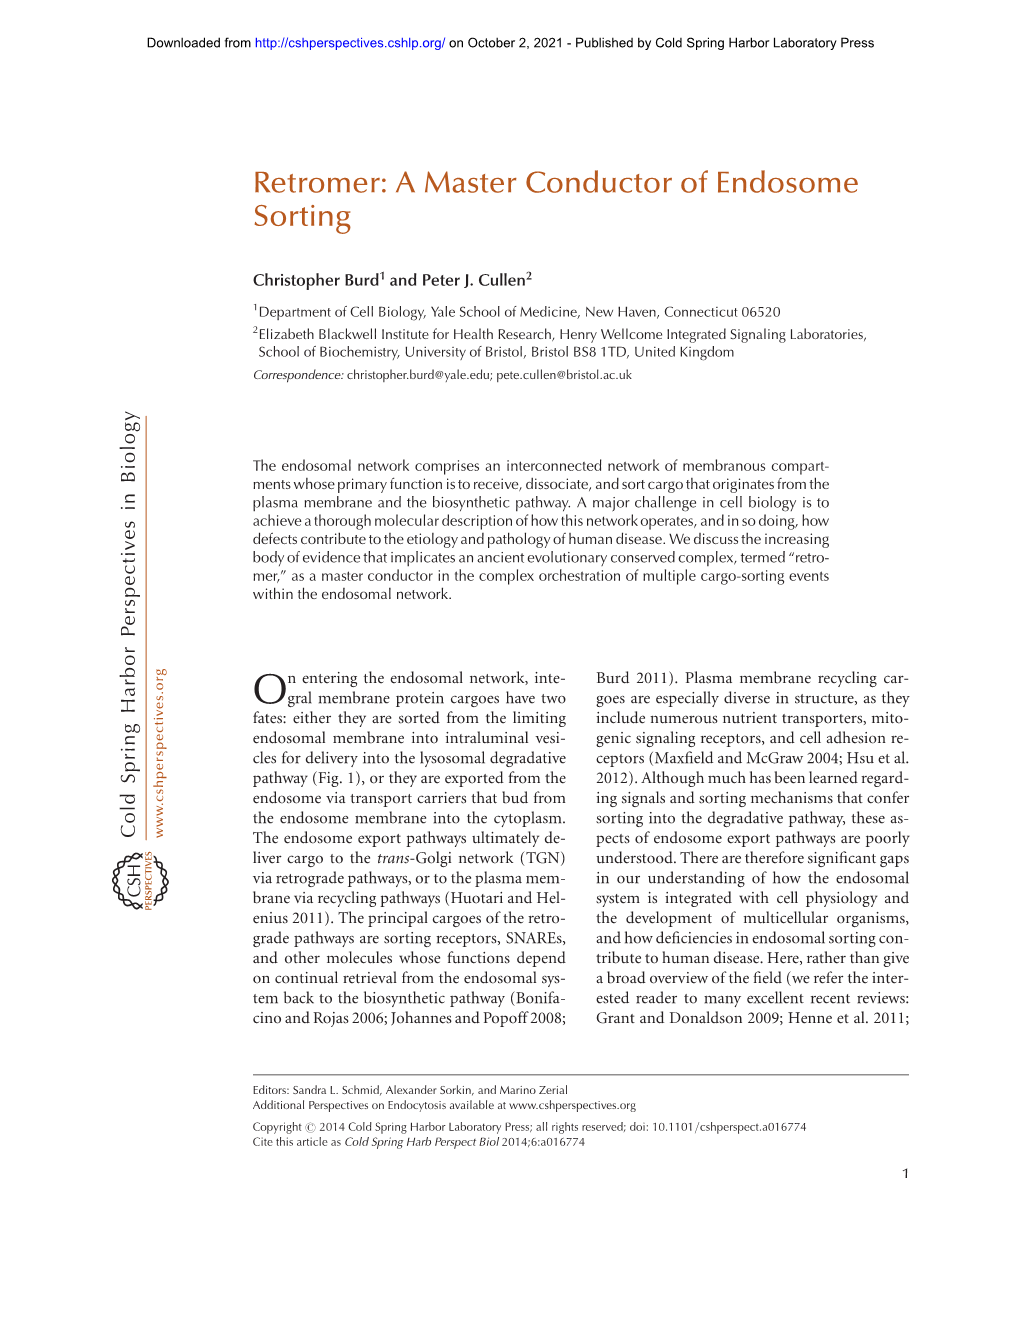 Retromer: a Master Conductor of Endosome Sorting